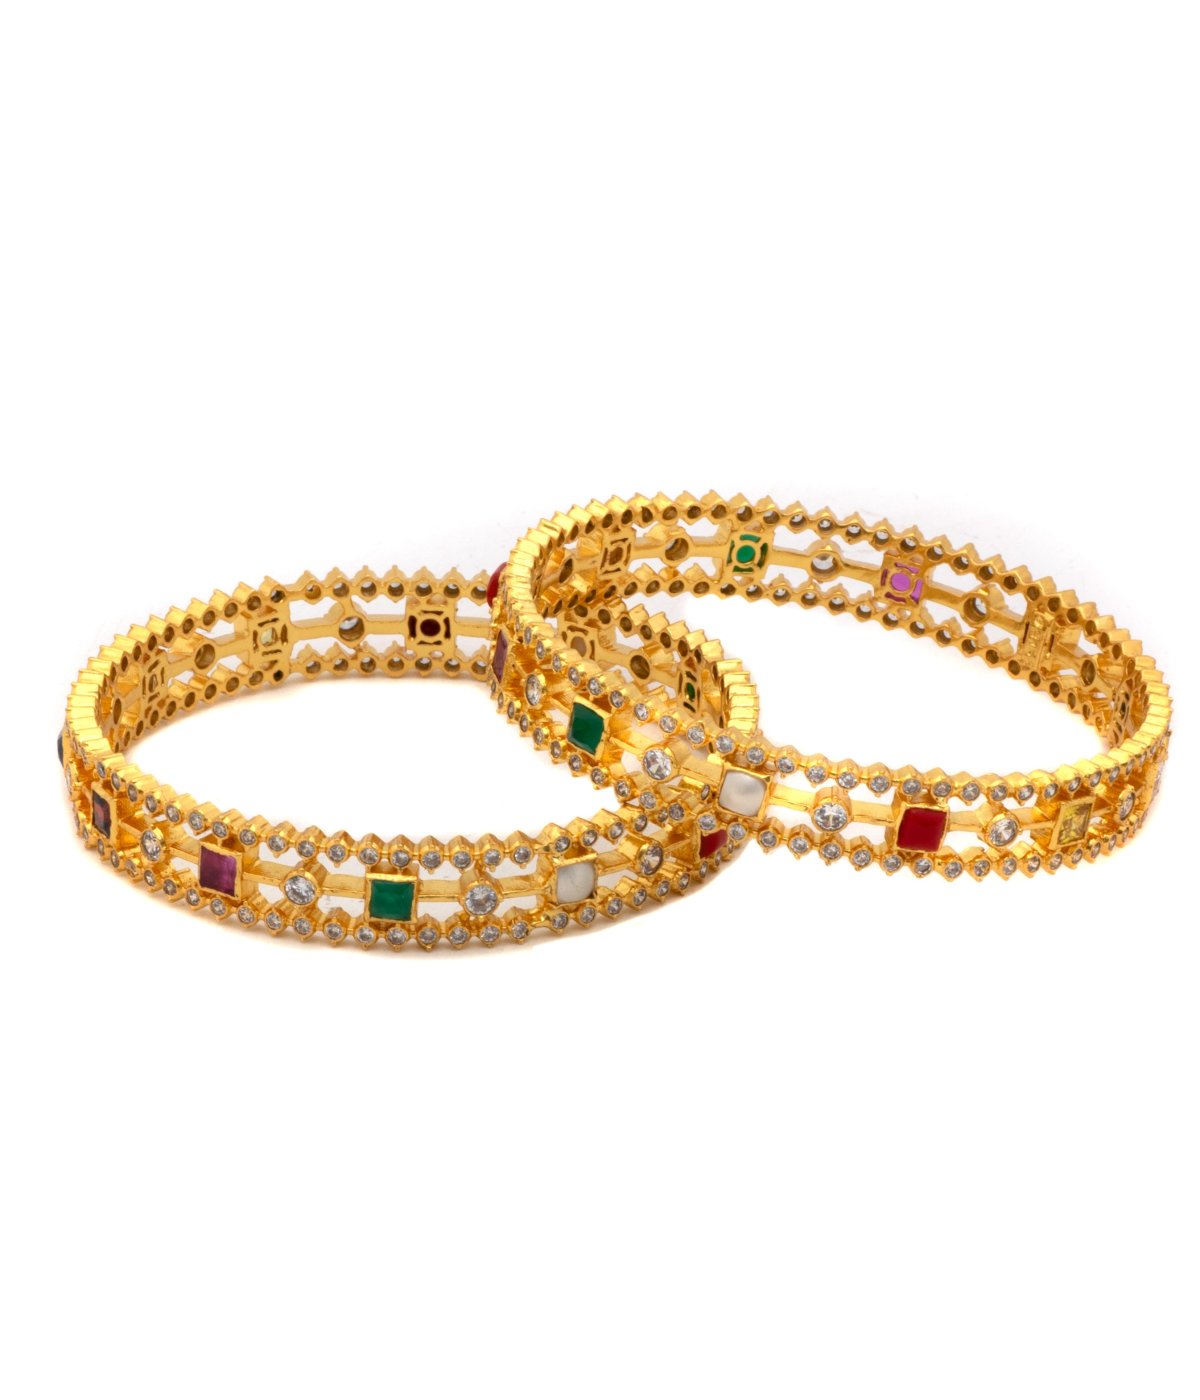 92.5 GOLD POLISH Set of two gold-toned, green and red textured bangles